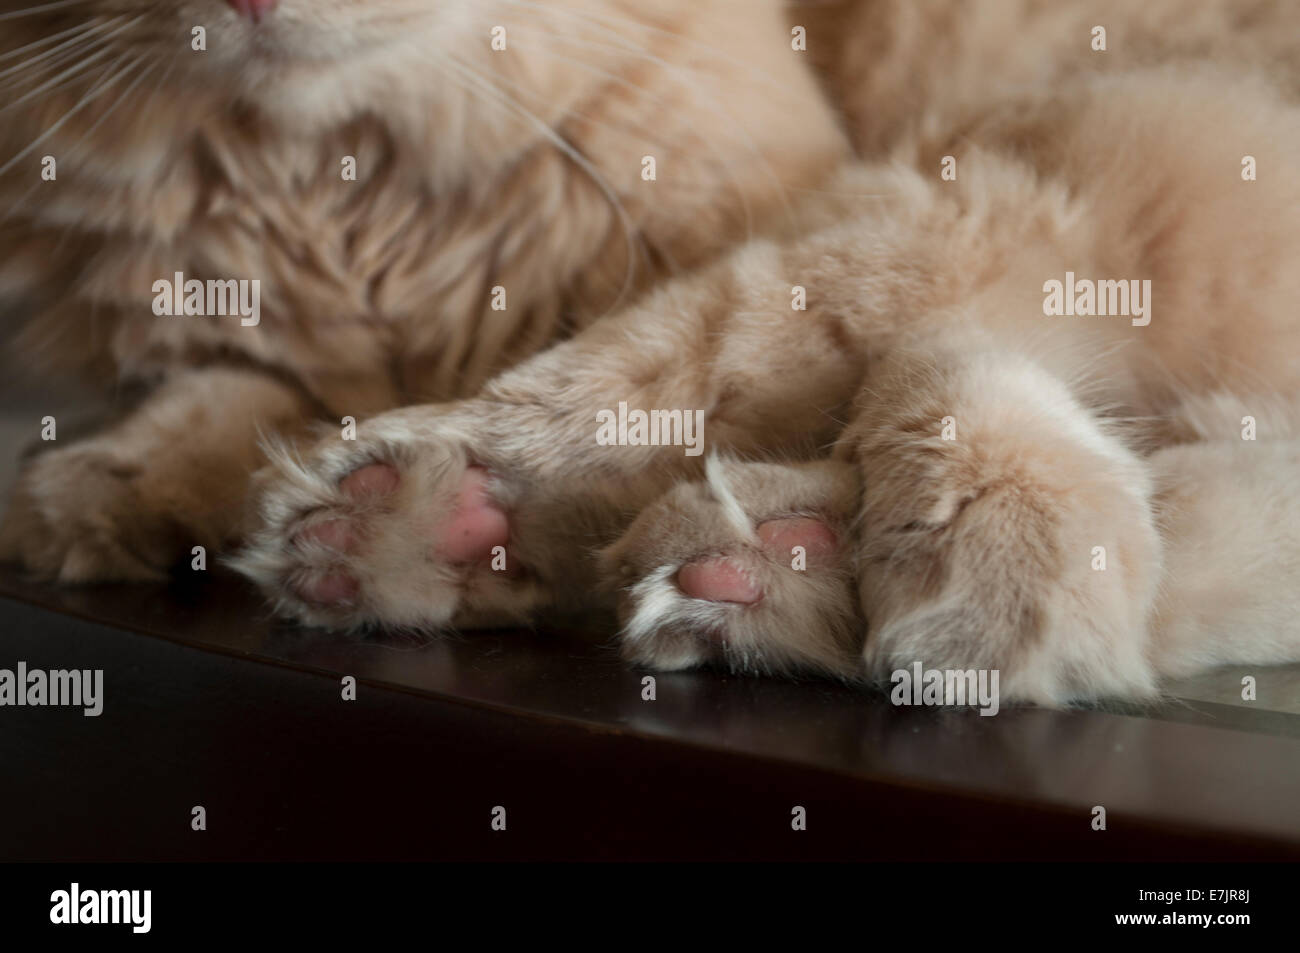 Close up of 4 cat paws Stock Photo